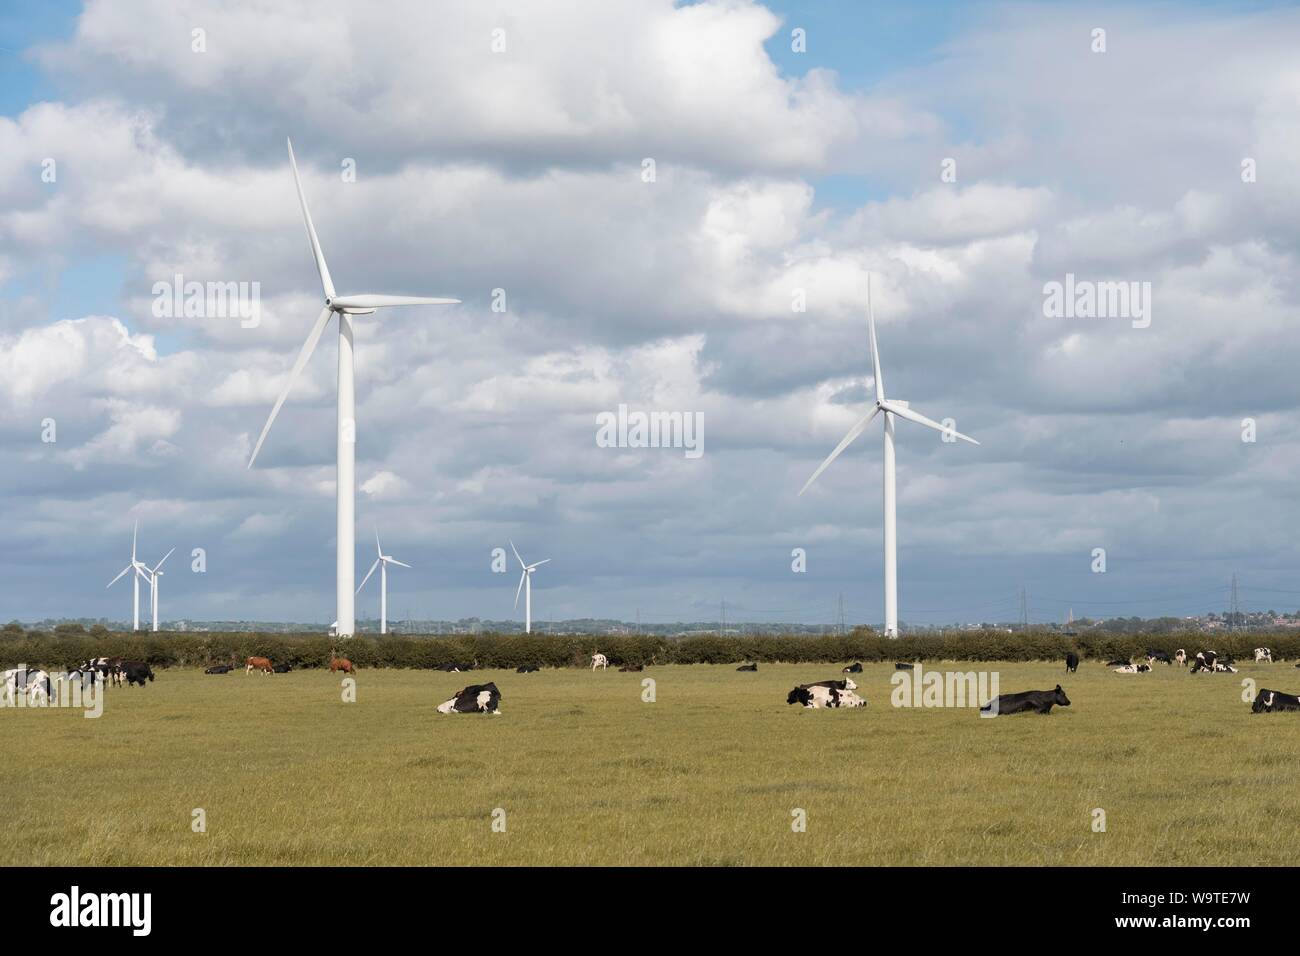 Wind turbine's in a field with cows Stock Photo